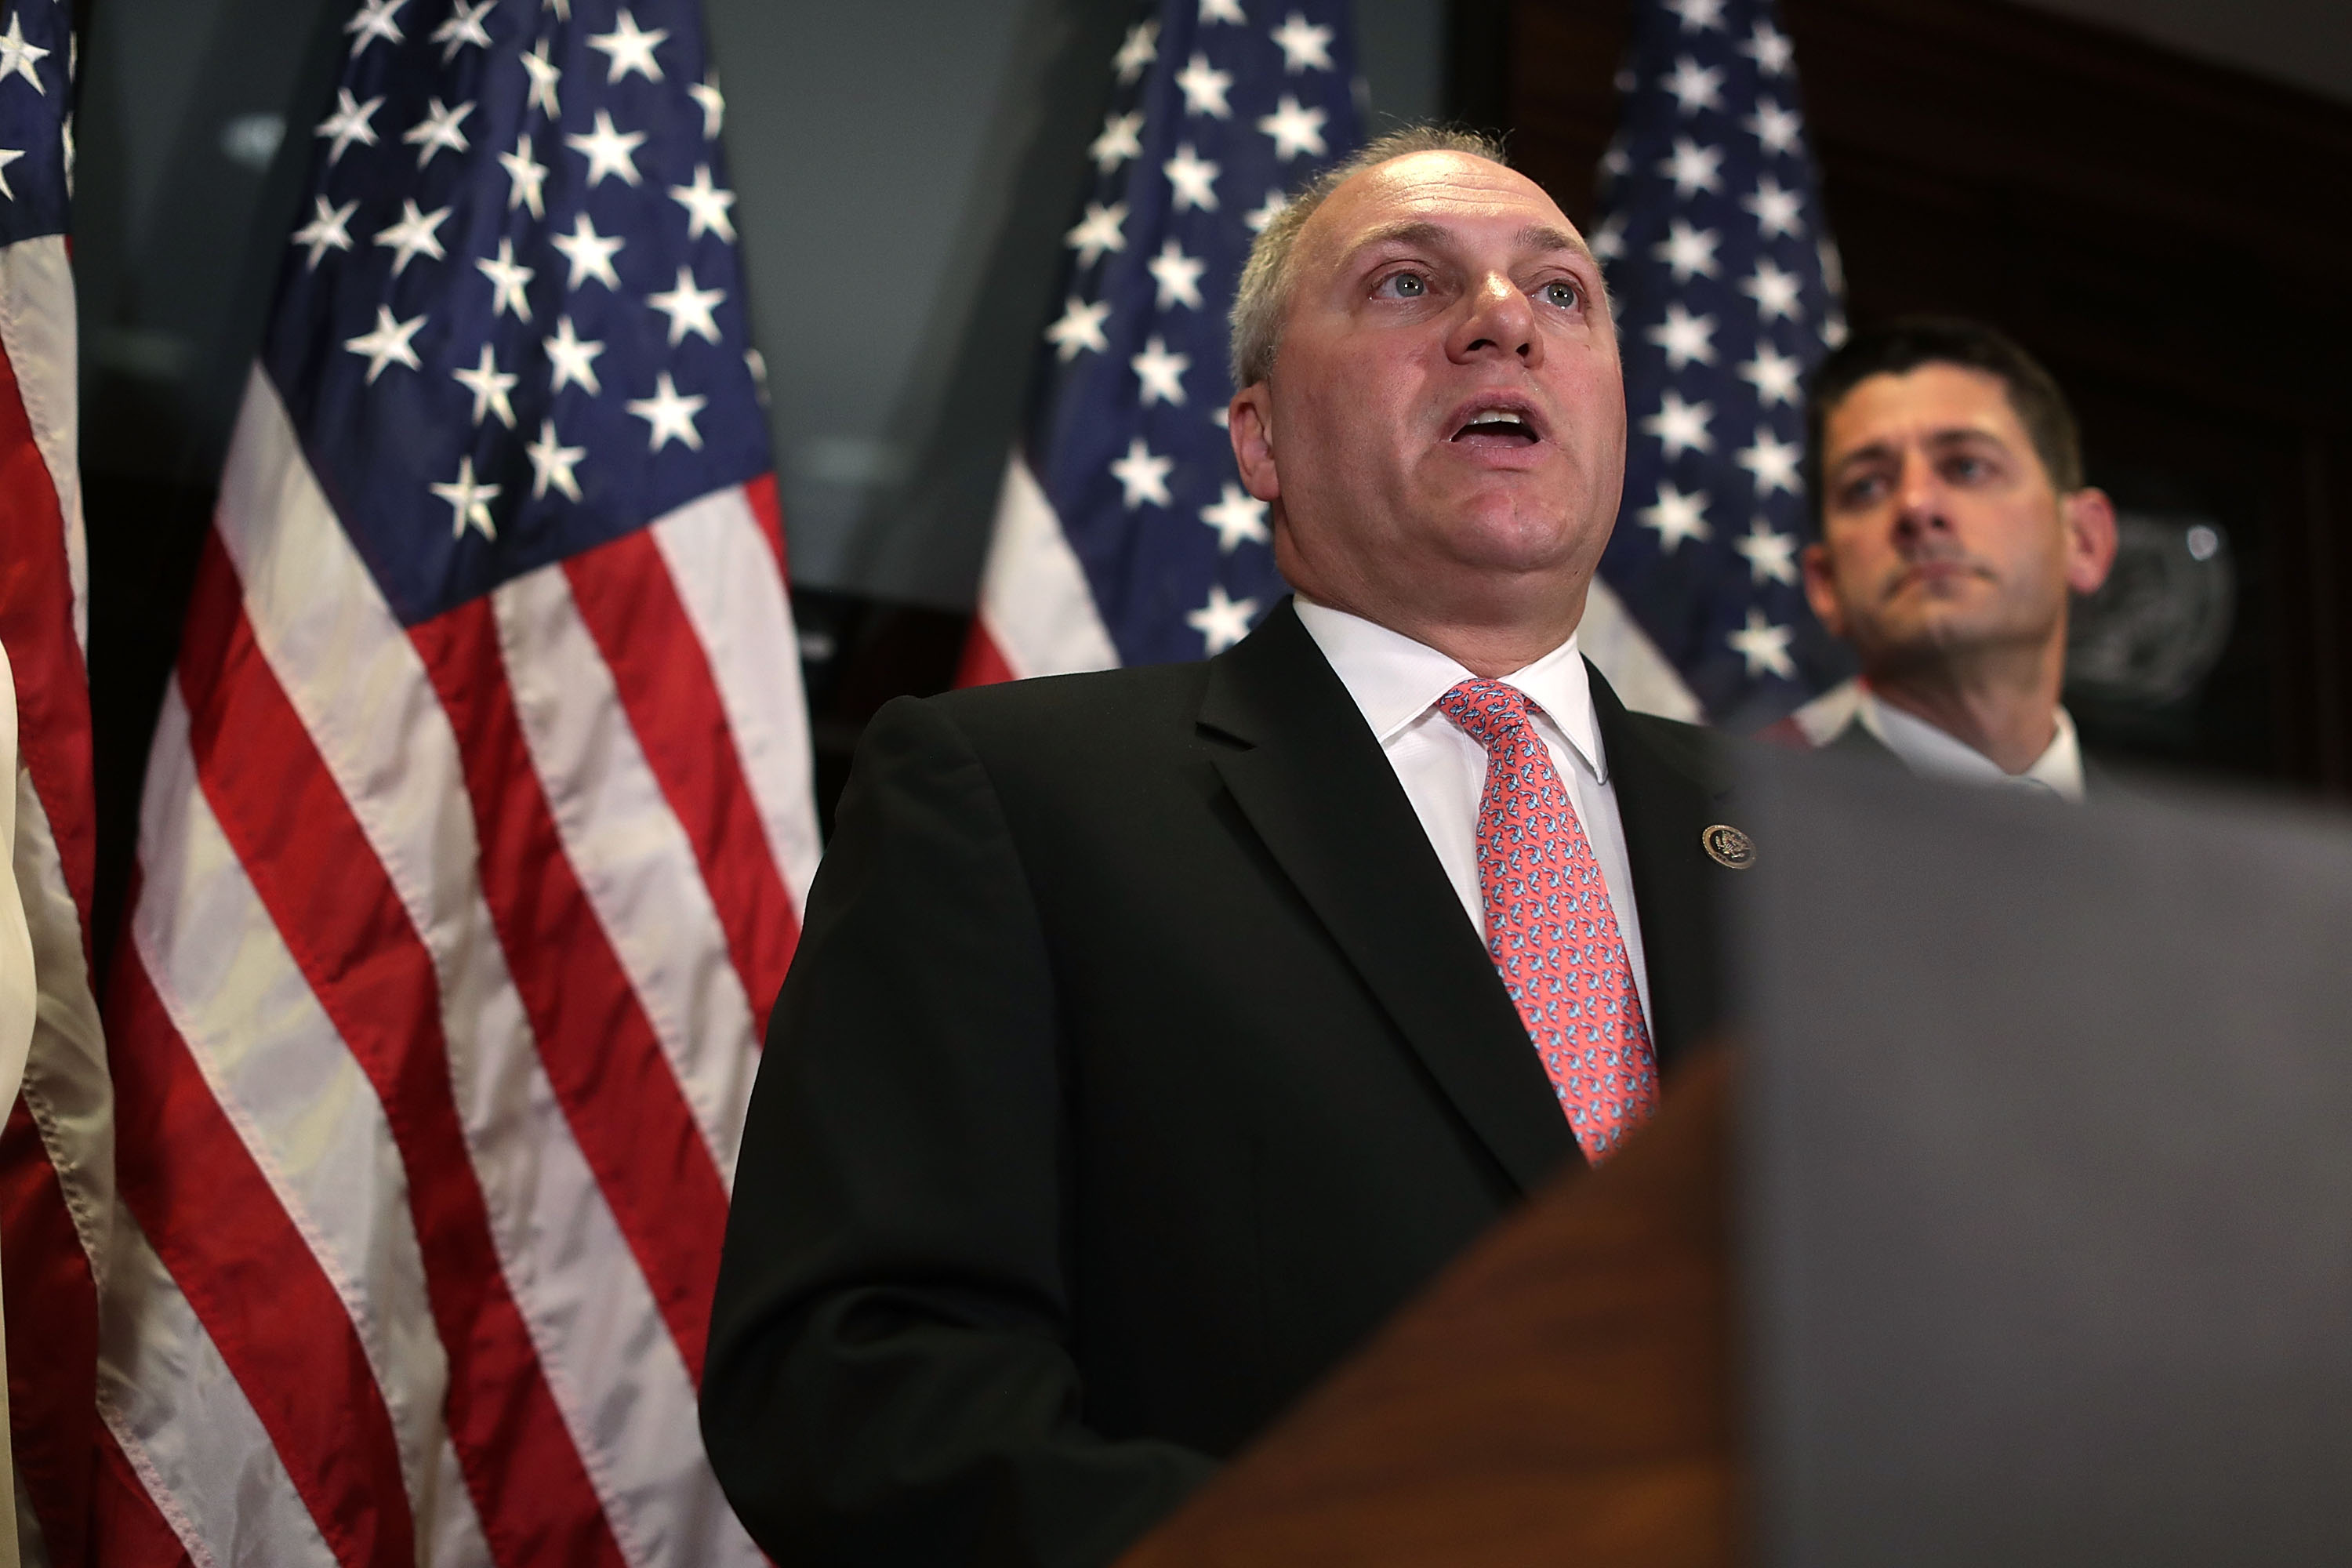 Steve Scalise Medical Update: What Is His Current Status? | Heavy.com